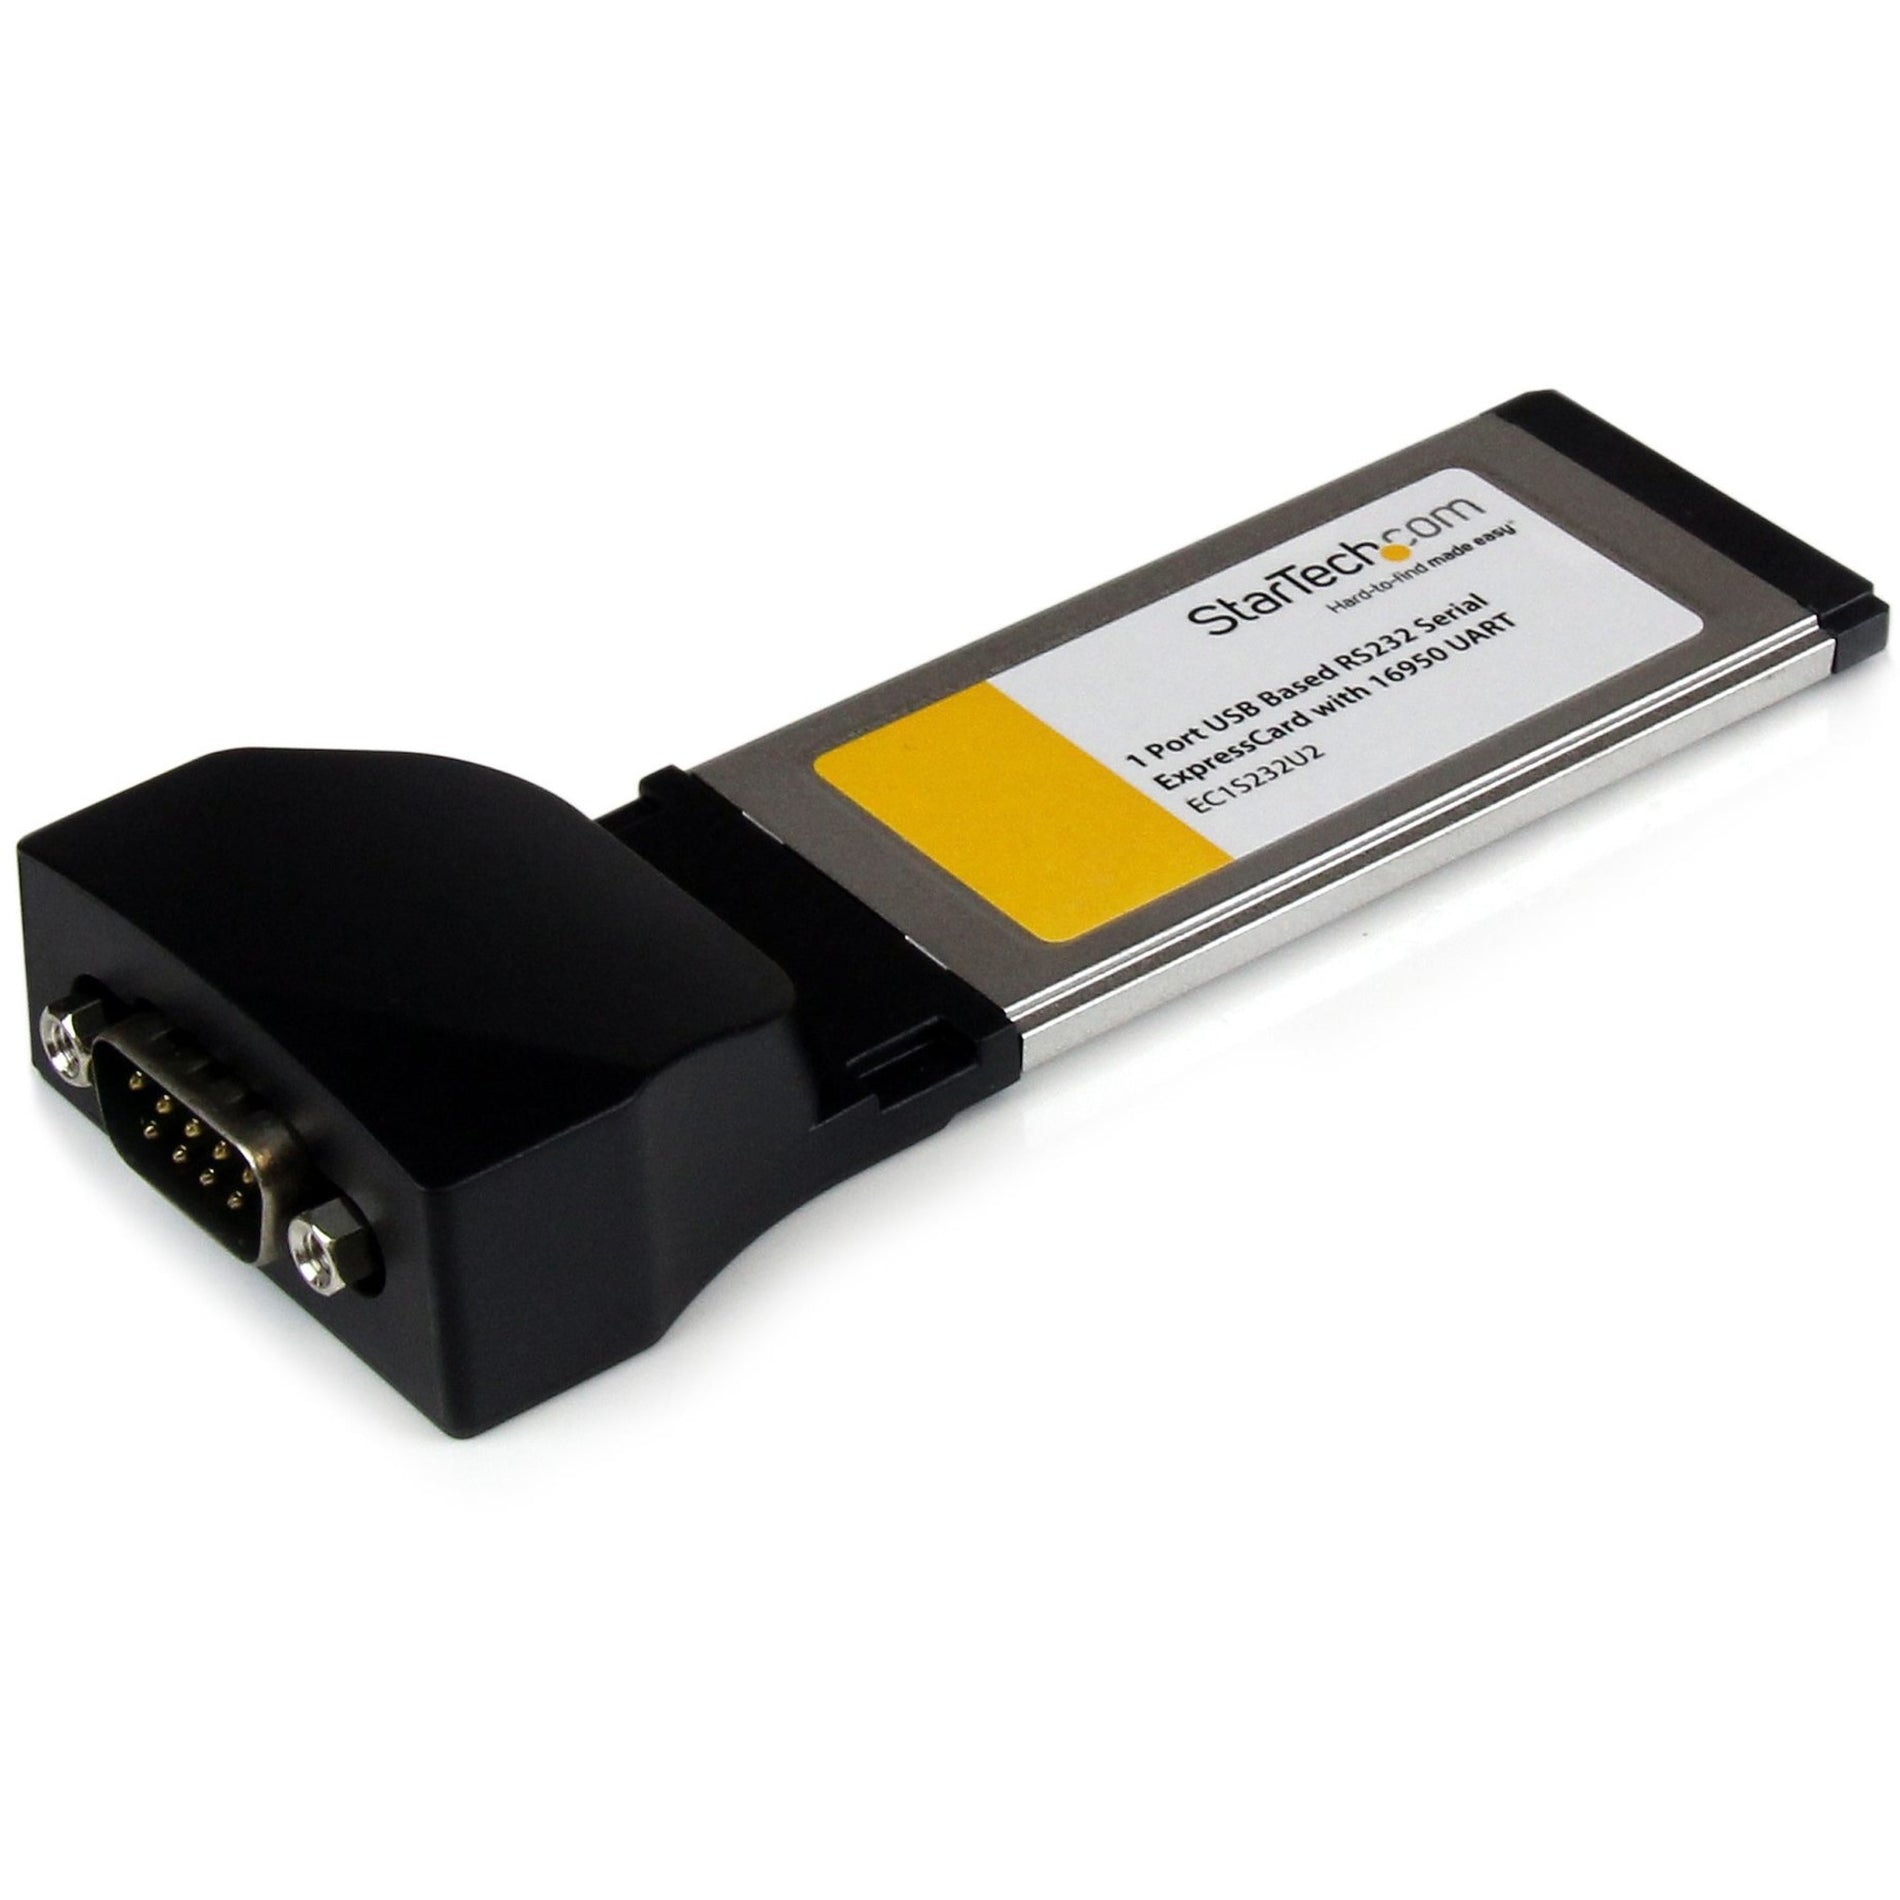 StarTech.com EC1S232U2 1 Port ExpressCard to RS232 DB9 Serial Adapter Card w/ 16950 - USB Based, Plug & Play, Up to 460.8kB/s